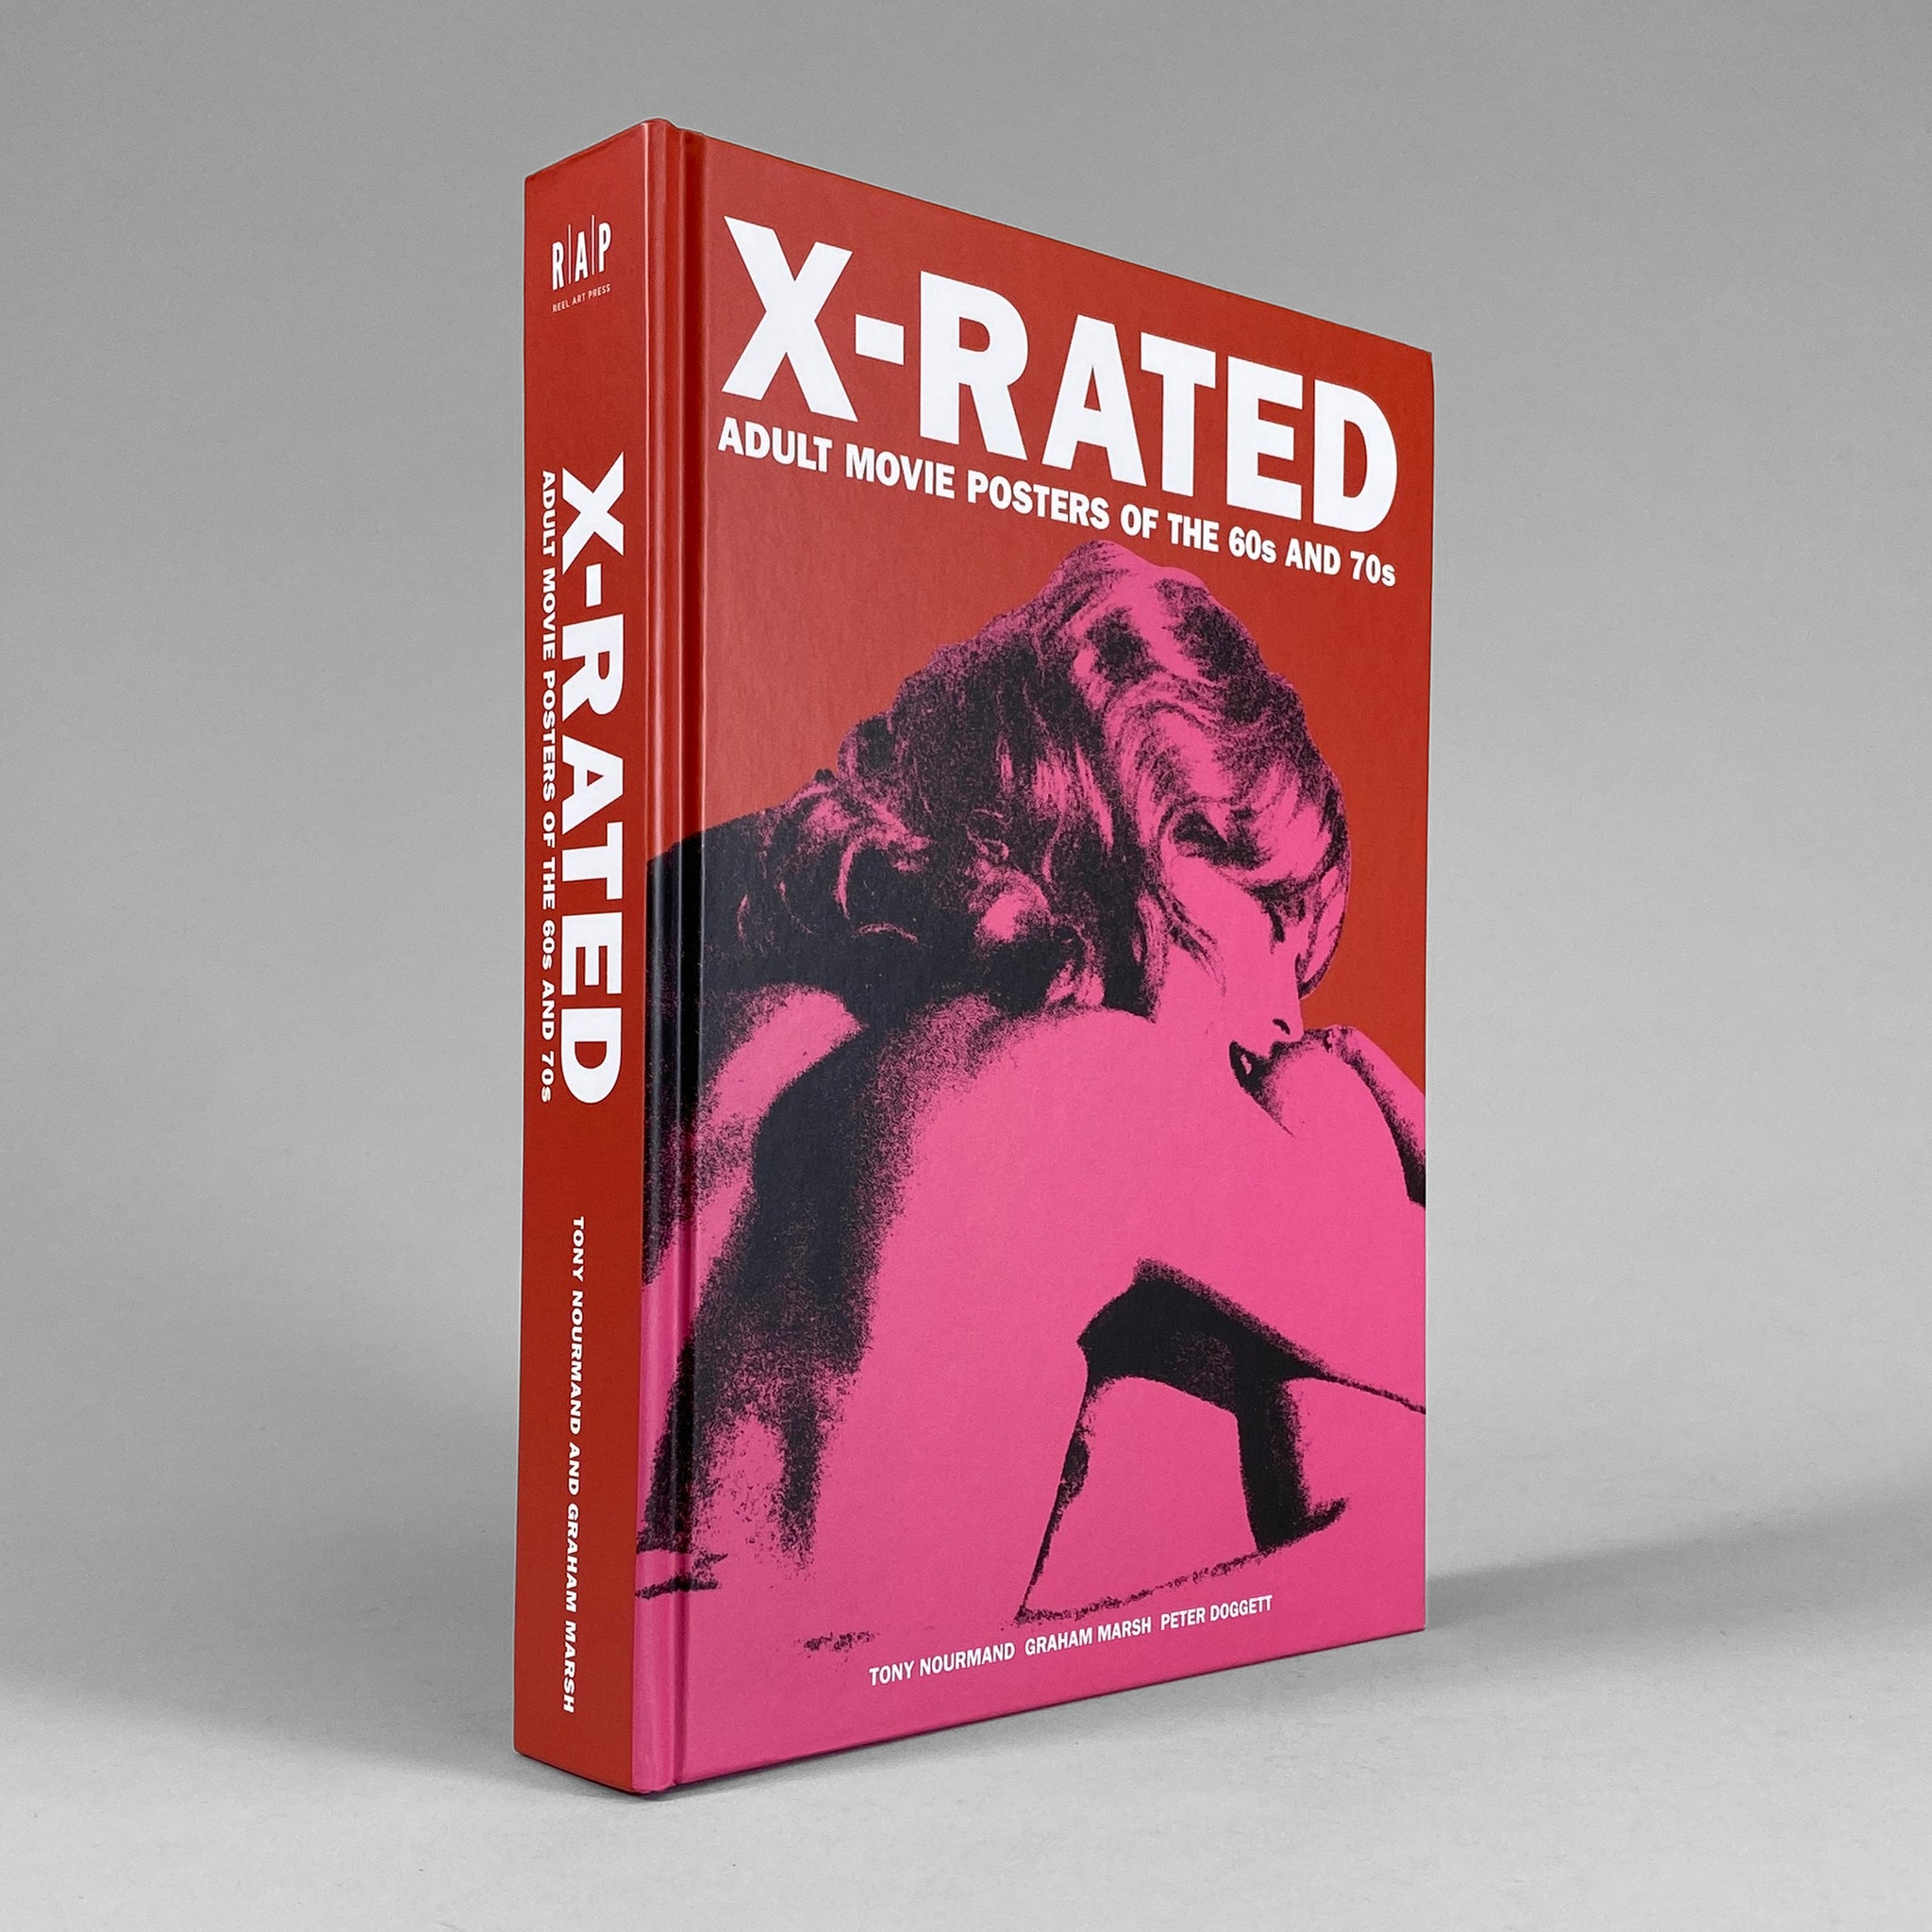 X-Rated: Adult Movie Posters of the 60s and 70s â€“ Draw Down